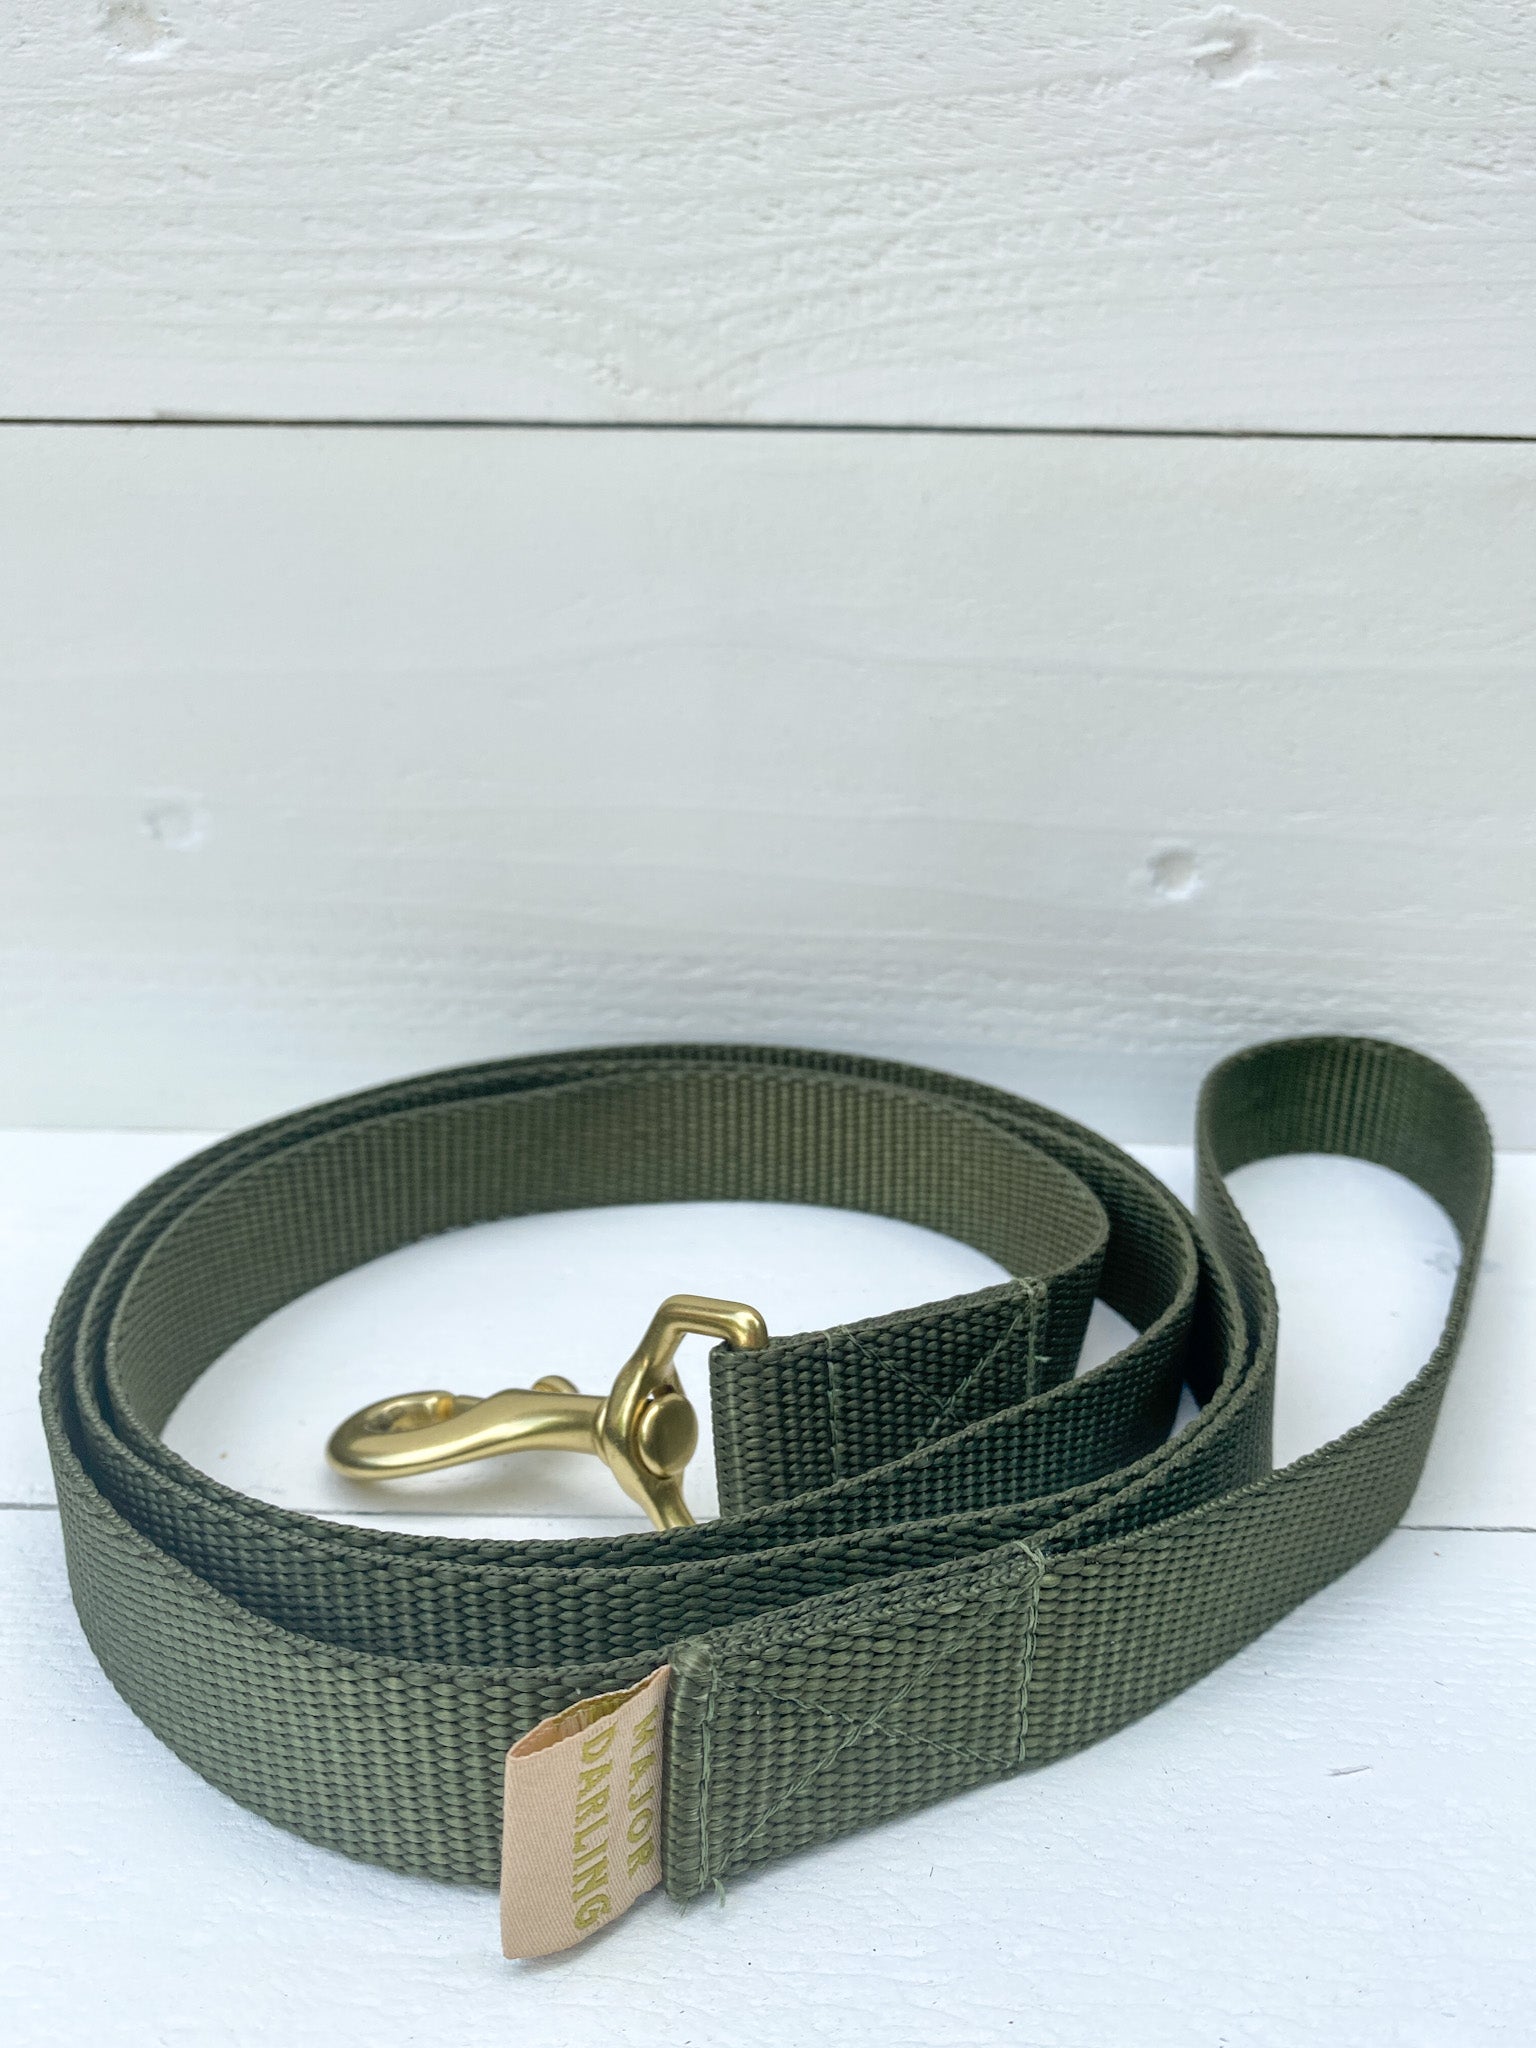 olive green dog leash made in Austin Texas